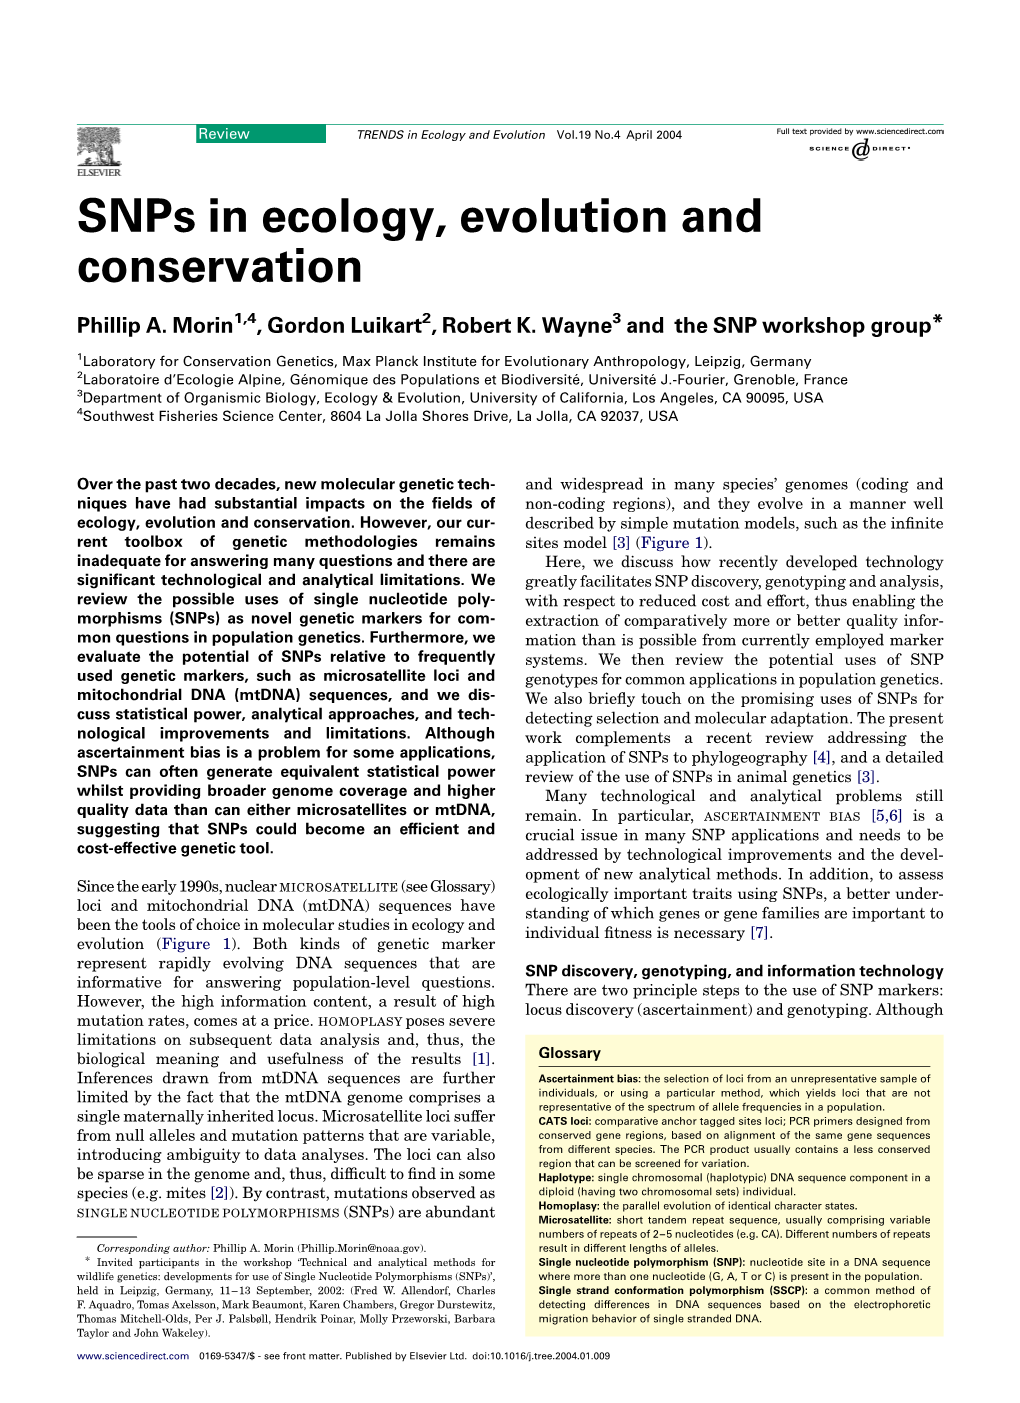 Snps in Ecology, Evolution and Conservation